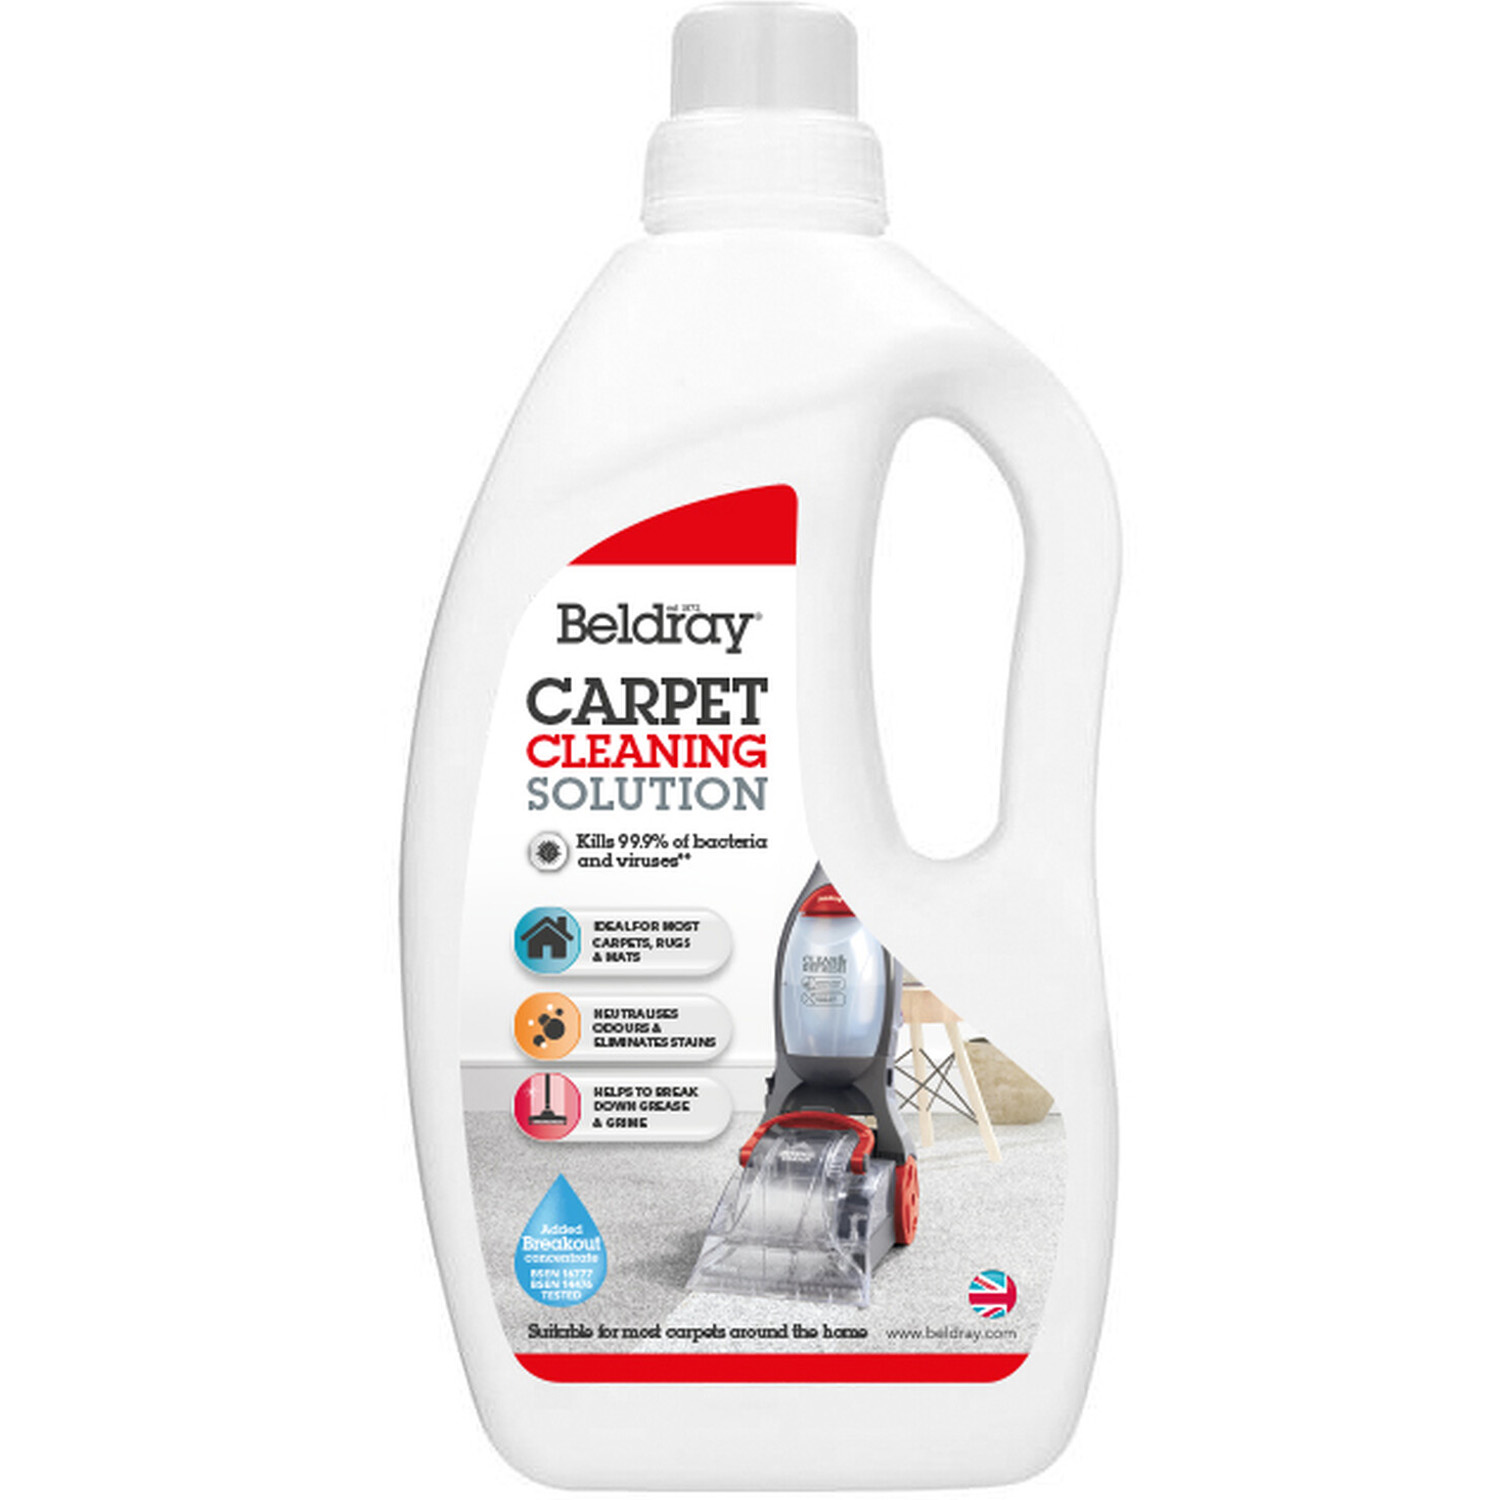 Beldray Carpet Cleaning Solution Image